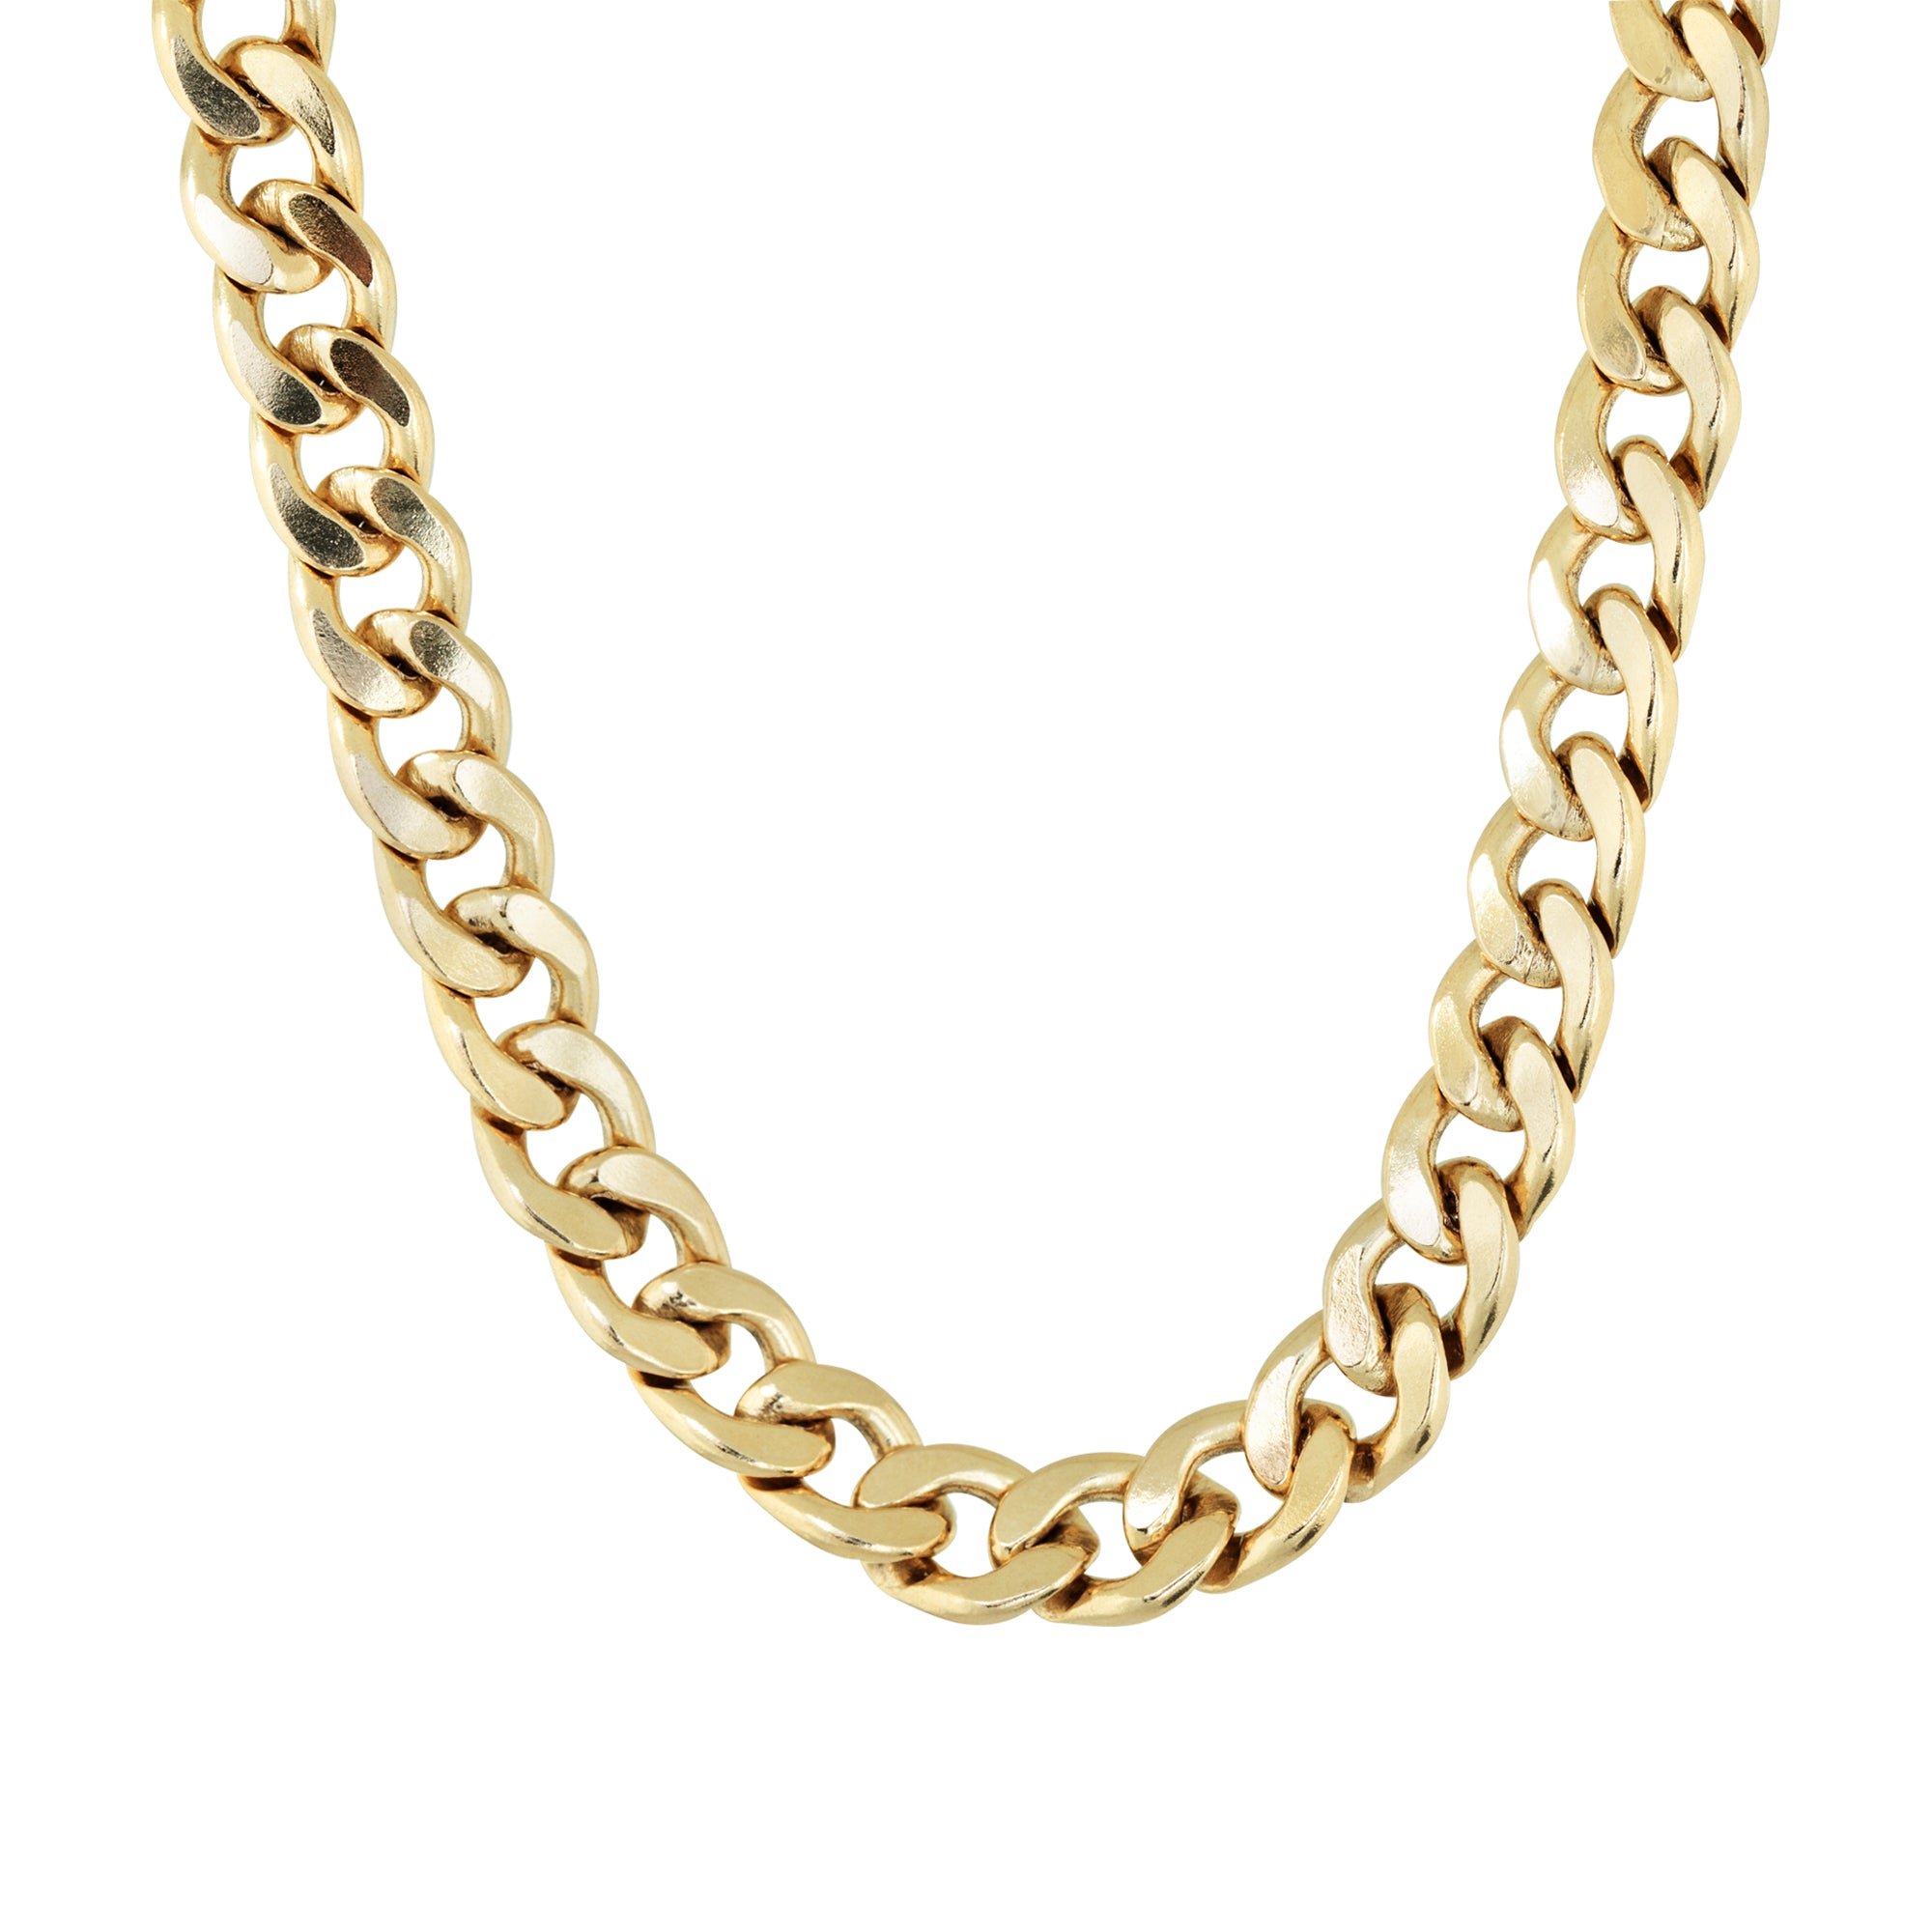 Cuban Link Chain - Small Gold Cuban Chain 14K Yellow Gold / 16in by Helen Ficalora